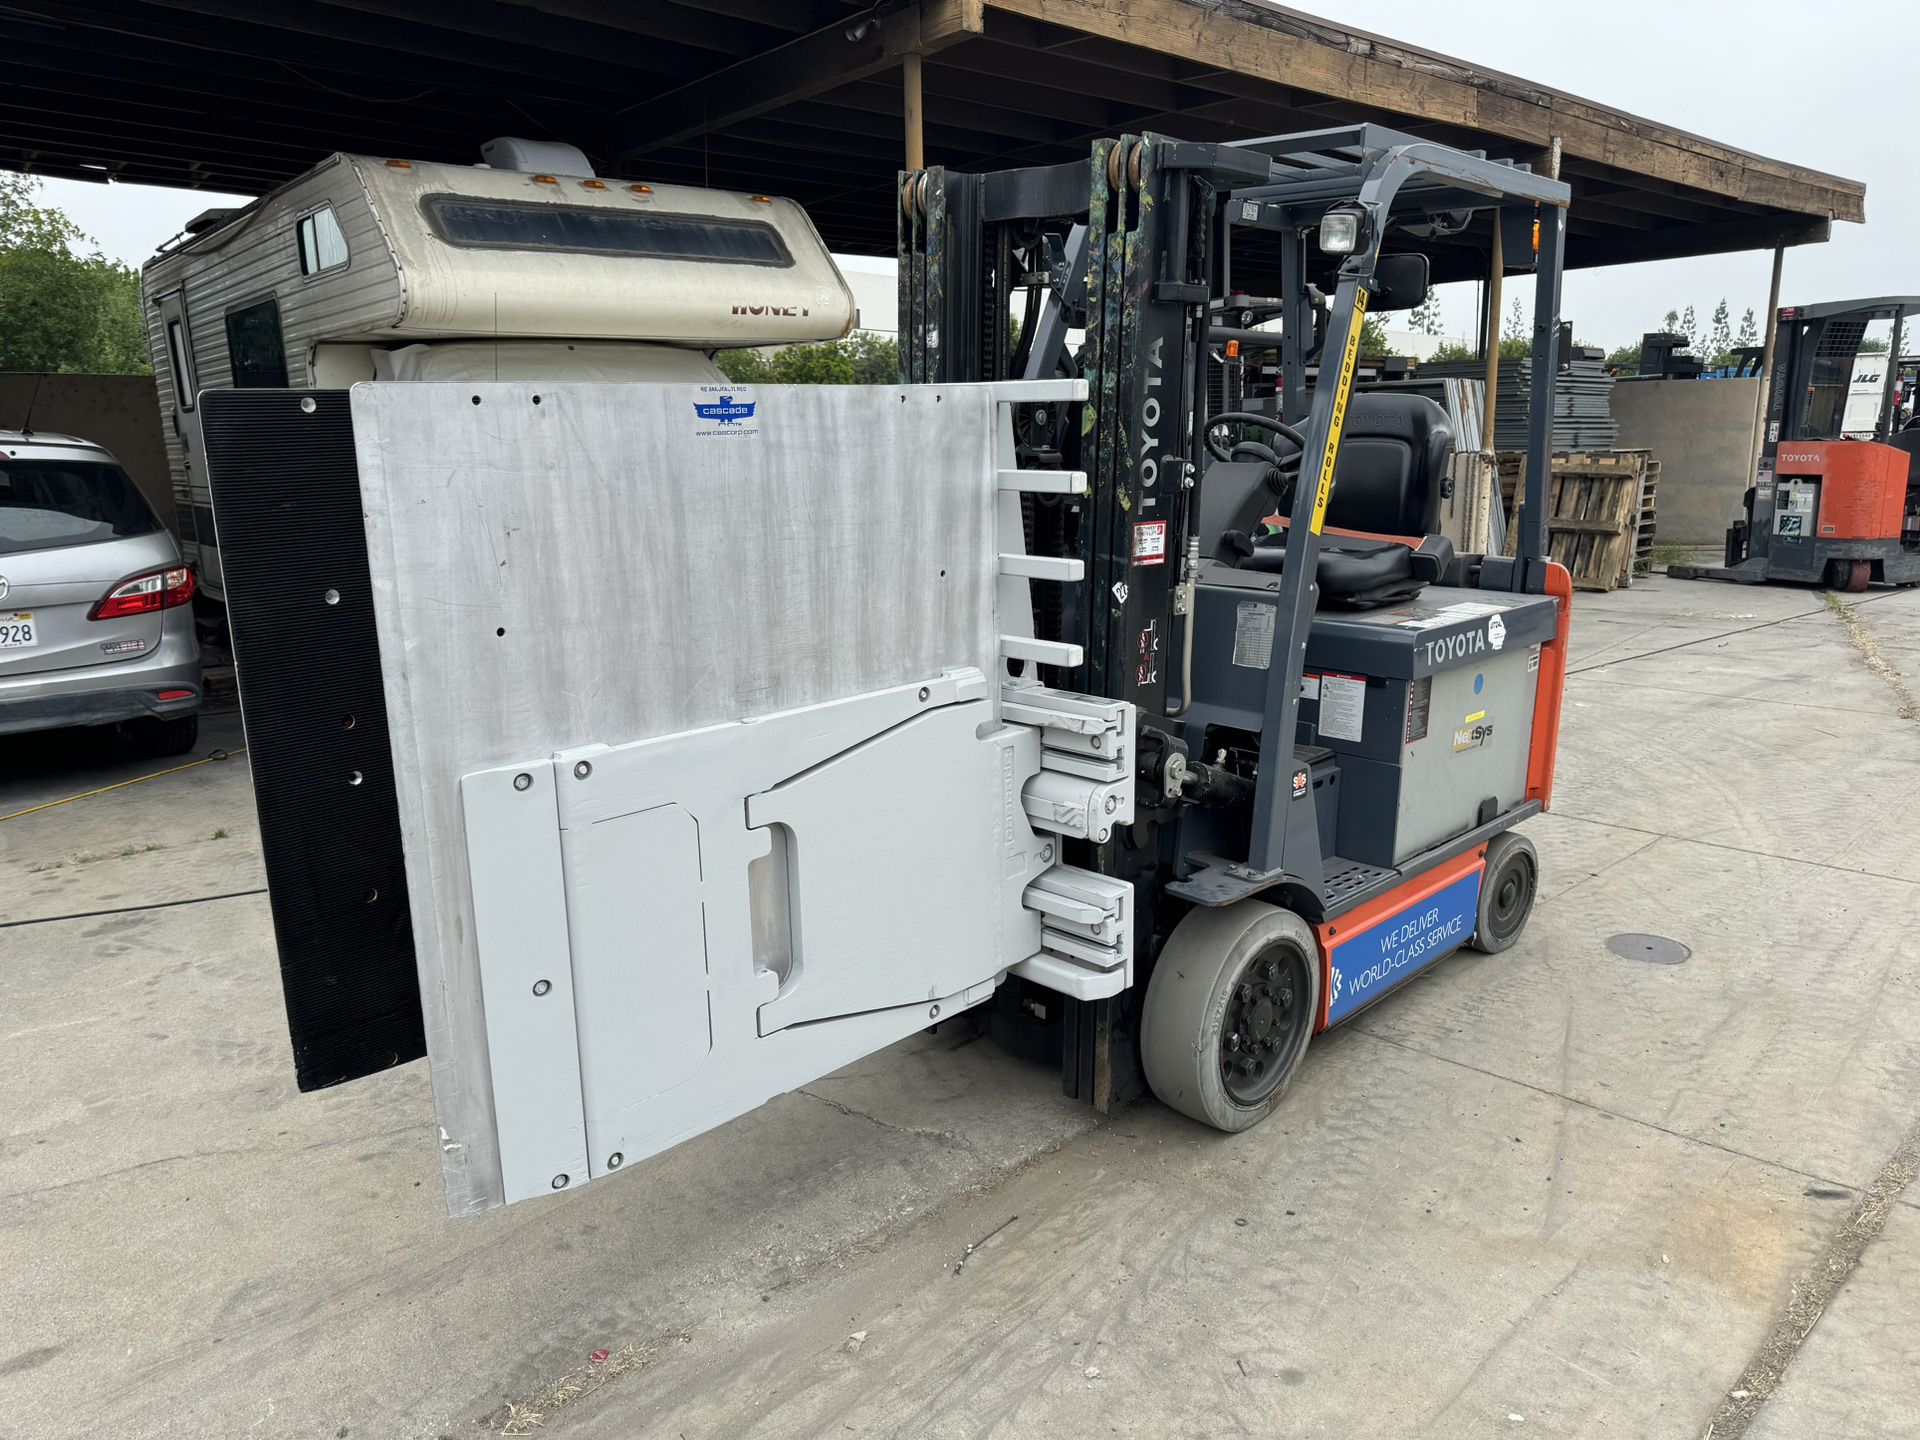 2019 Toyota forklift clamp